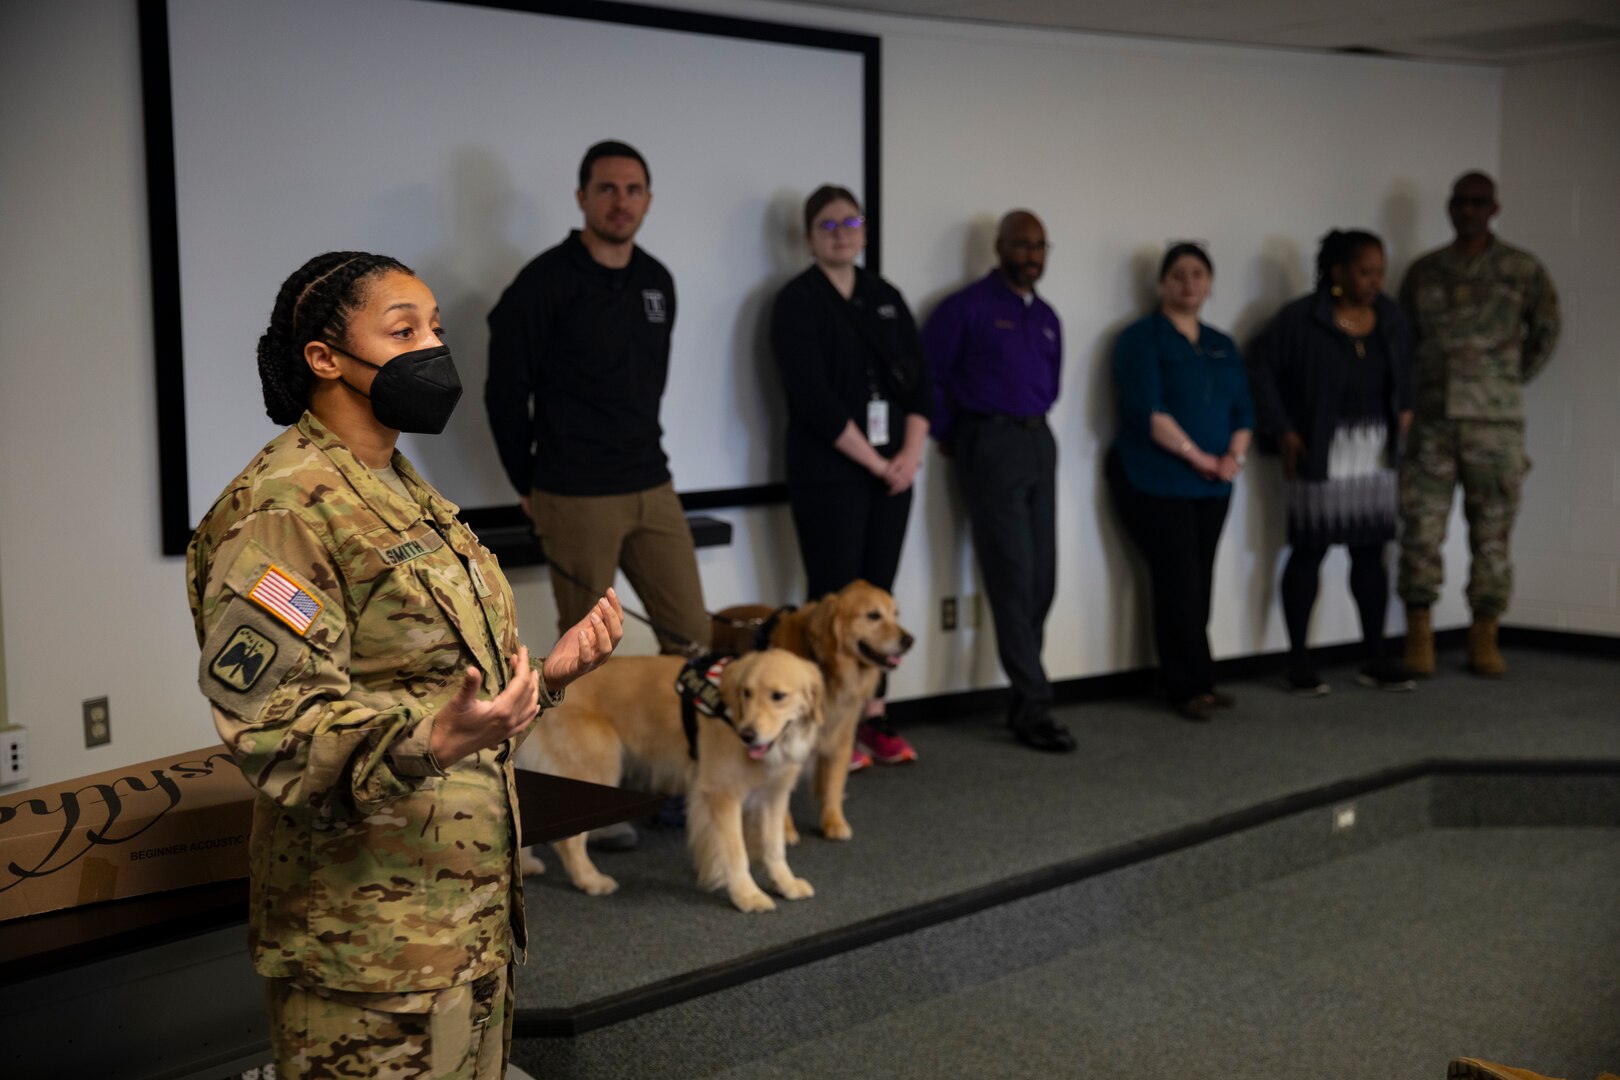 The District of Columbia Army Aviation hosted a wellness event for Soldiers to understand resources available through the military and veterans organizations March 10, 2024 at the Army Aviation Support Facility on Fort Belvoir.